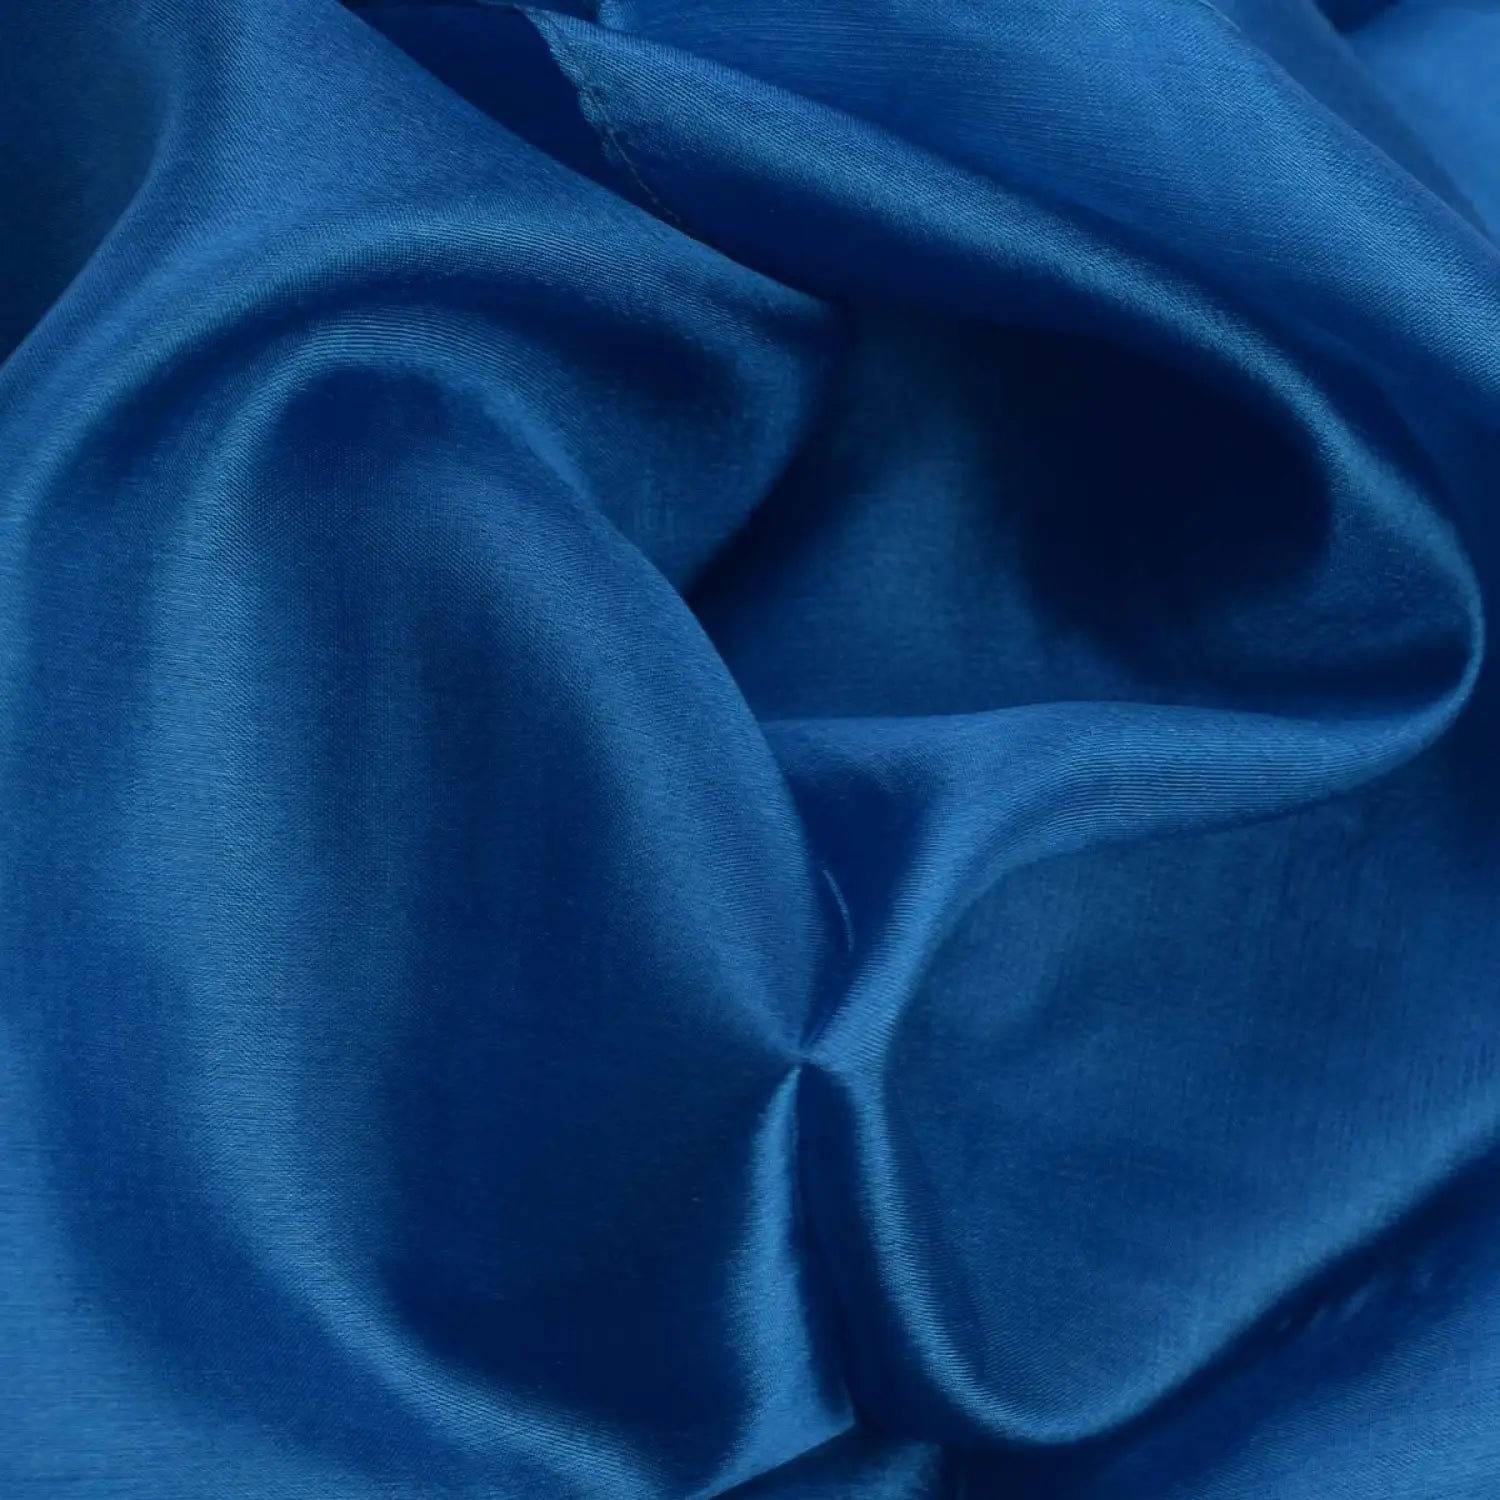 Blue mulberry silk scarf with luxurious fabric